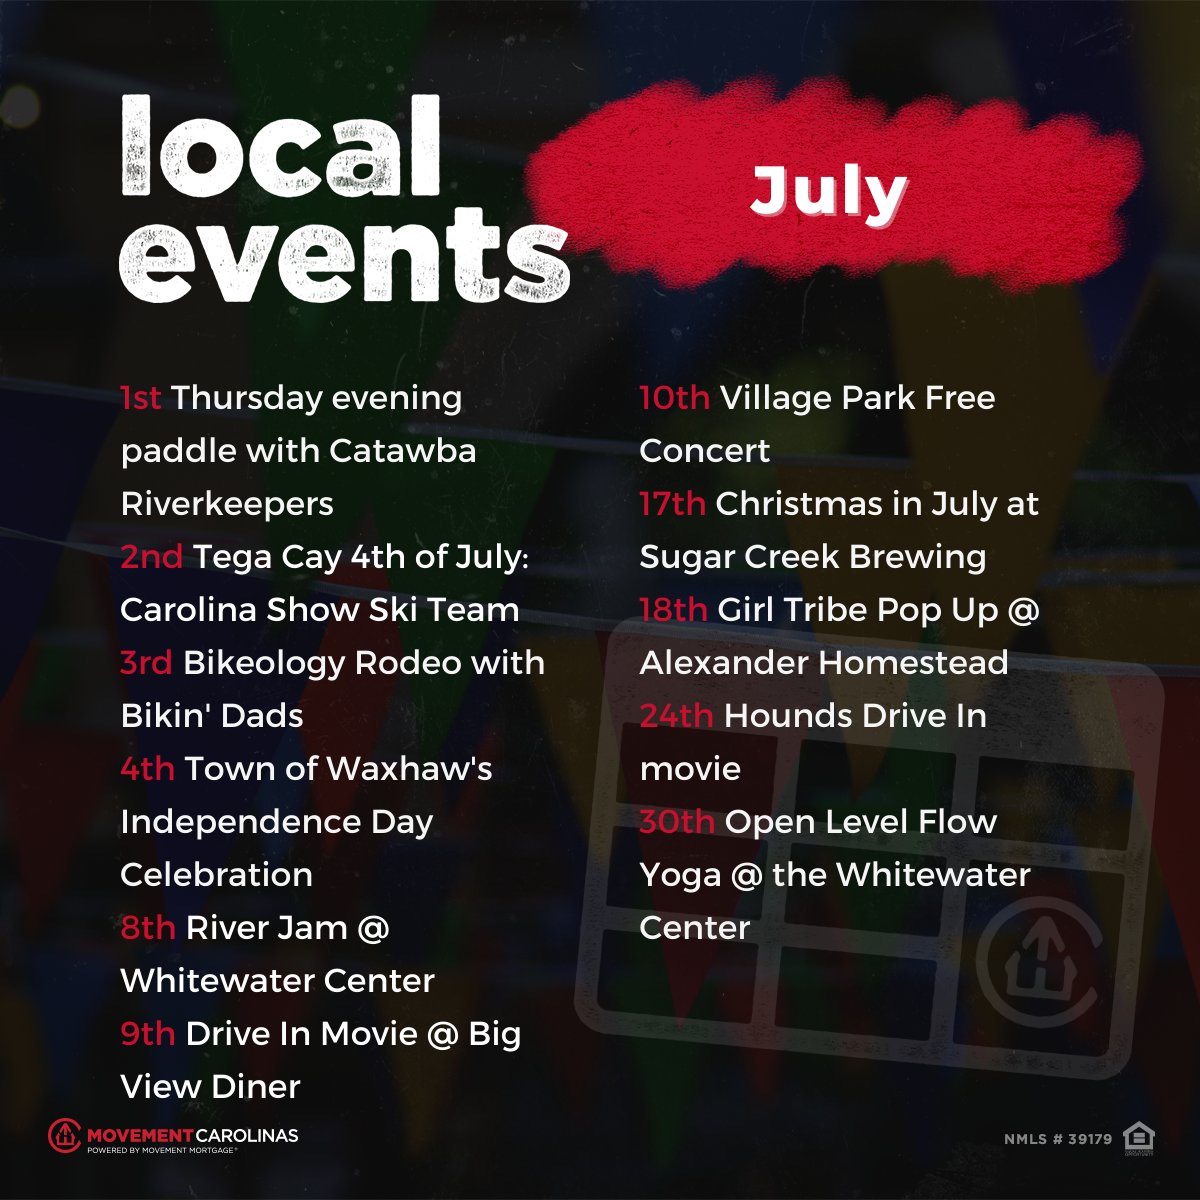 Check out some of these great events in the Charlotte area in the month of July!

#july #july4th #events #charlotteevents #localevents #queencity #queencityevents #eventsinjuly #thingstodoincharlotte #charlottesgotalot #explorecharlotte #charlottenc